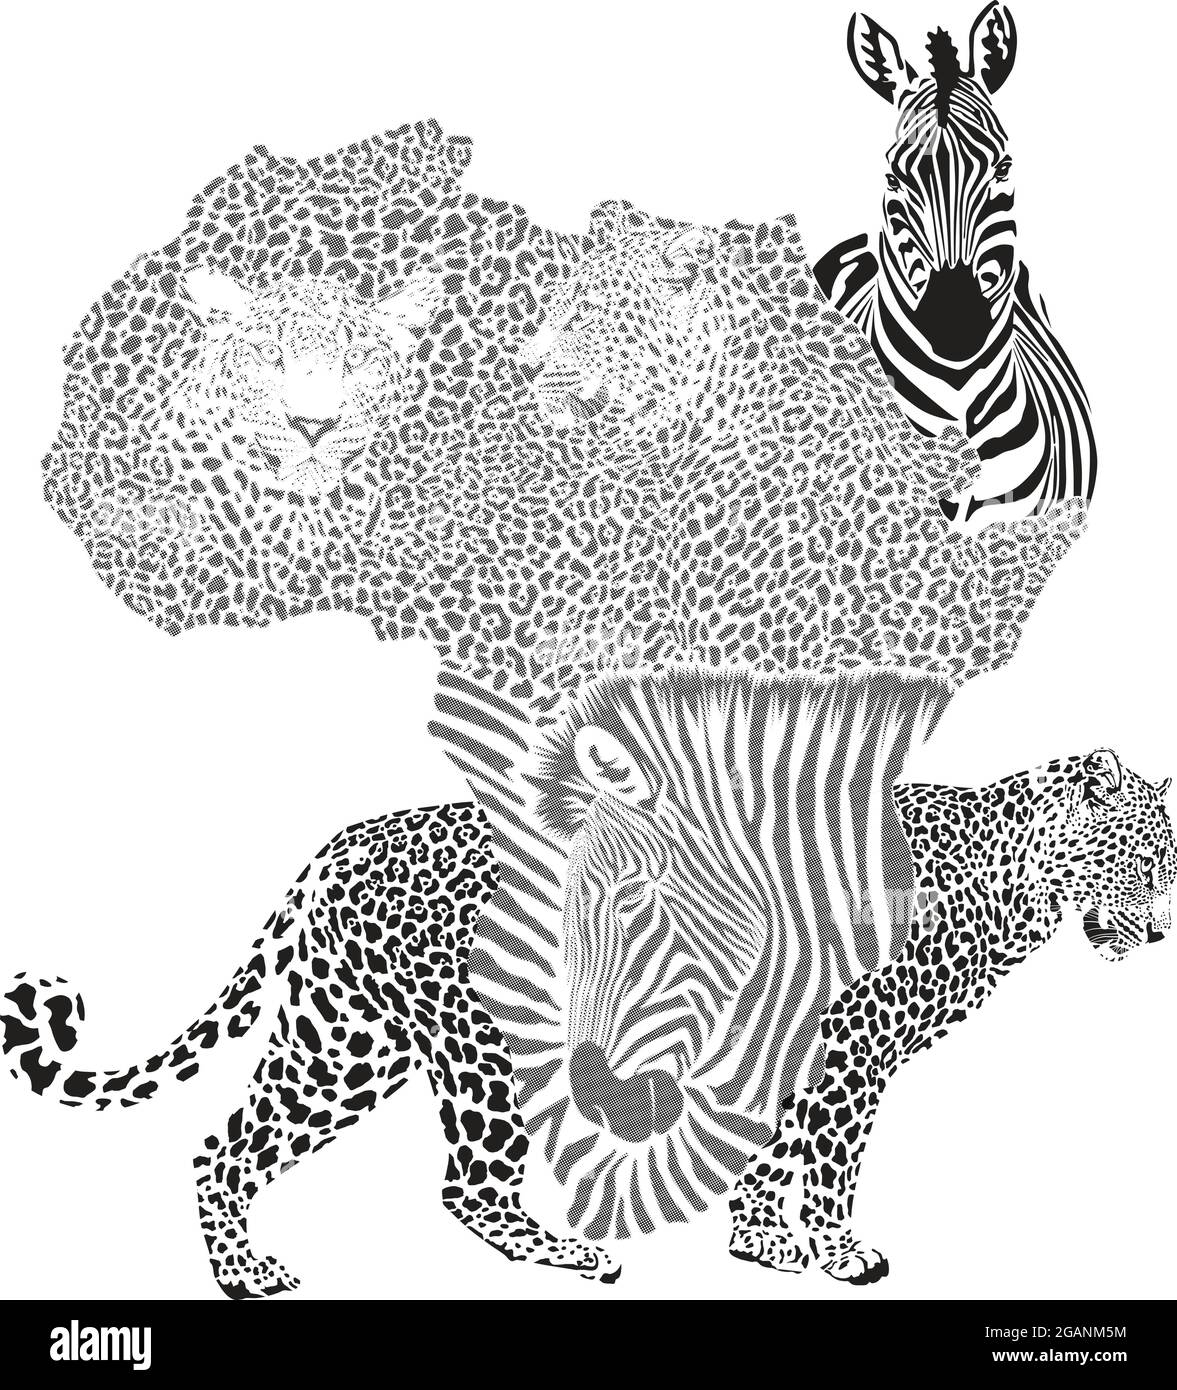 Background with a map of Africa with a leopard and zebra motif Stock Vector